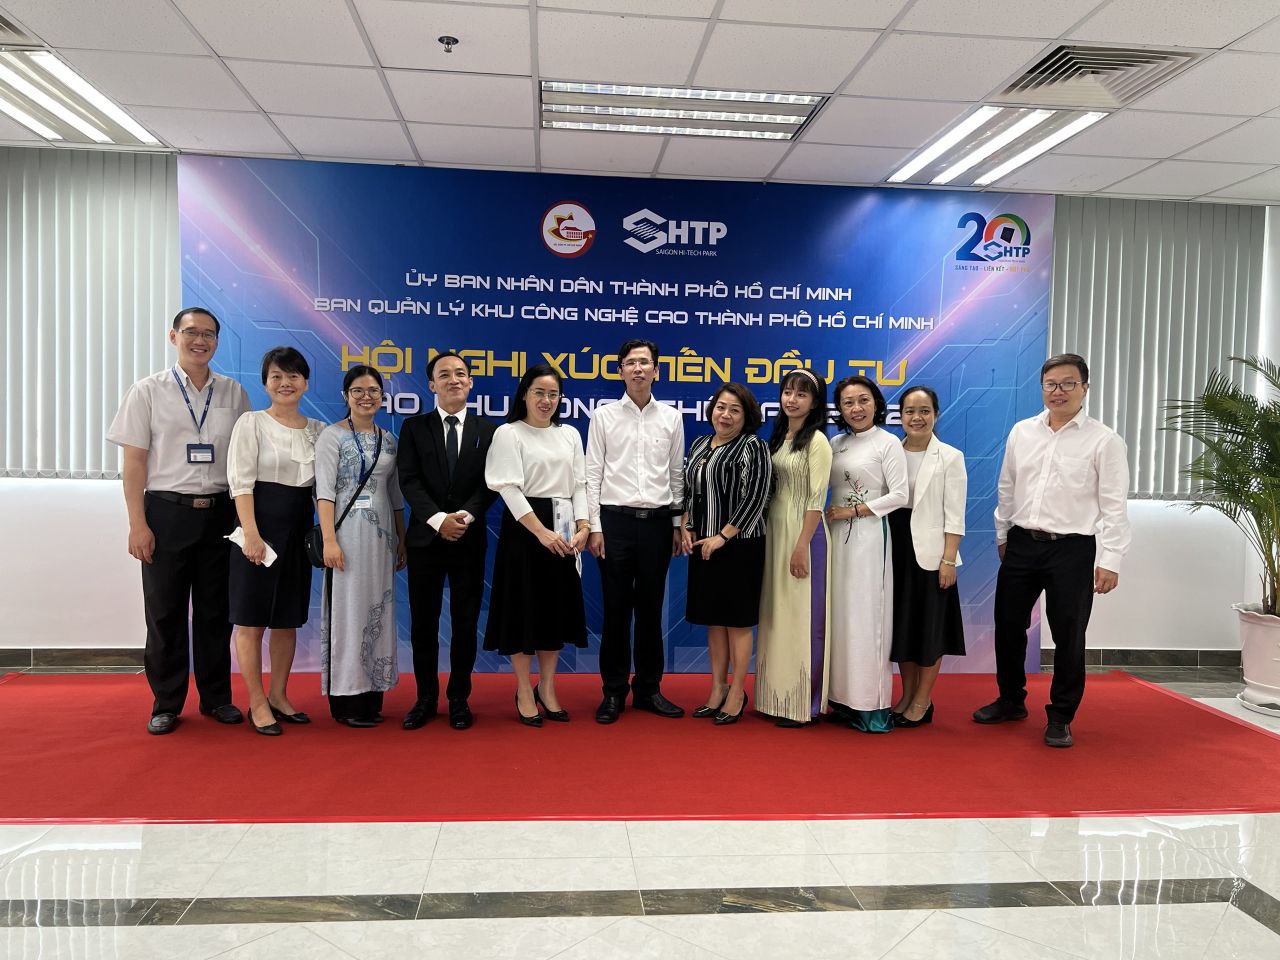 INVESTMENT PROMOTION CONFERENCE 2022 IN SAIGON HIGH-TECH PARK HOLDED AT SCS BUILDING ON JUNE 27TH, 2022